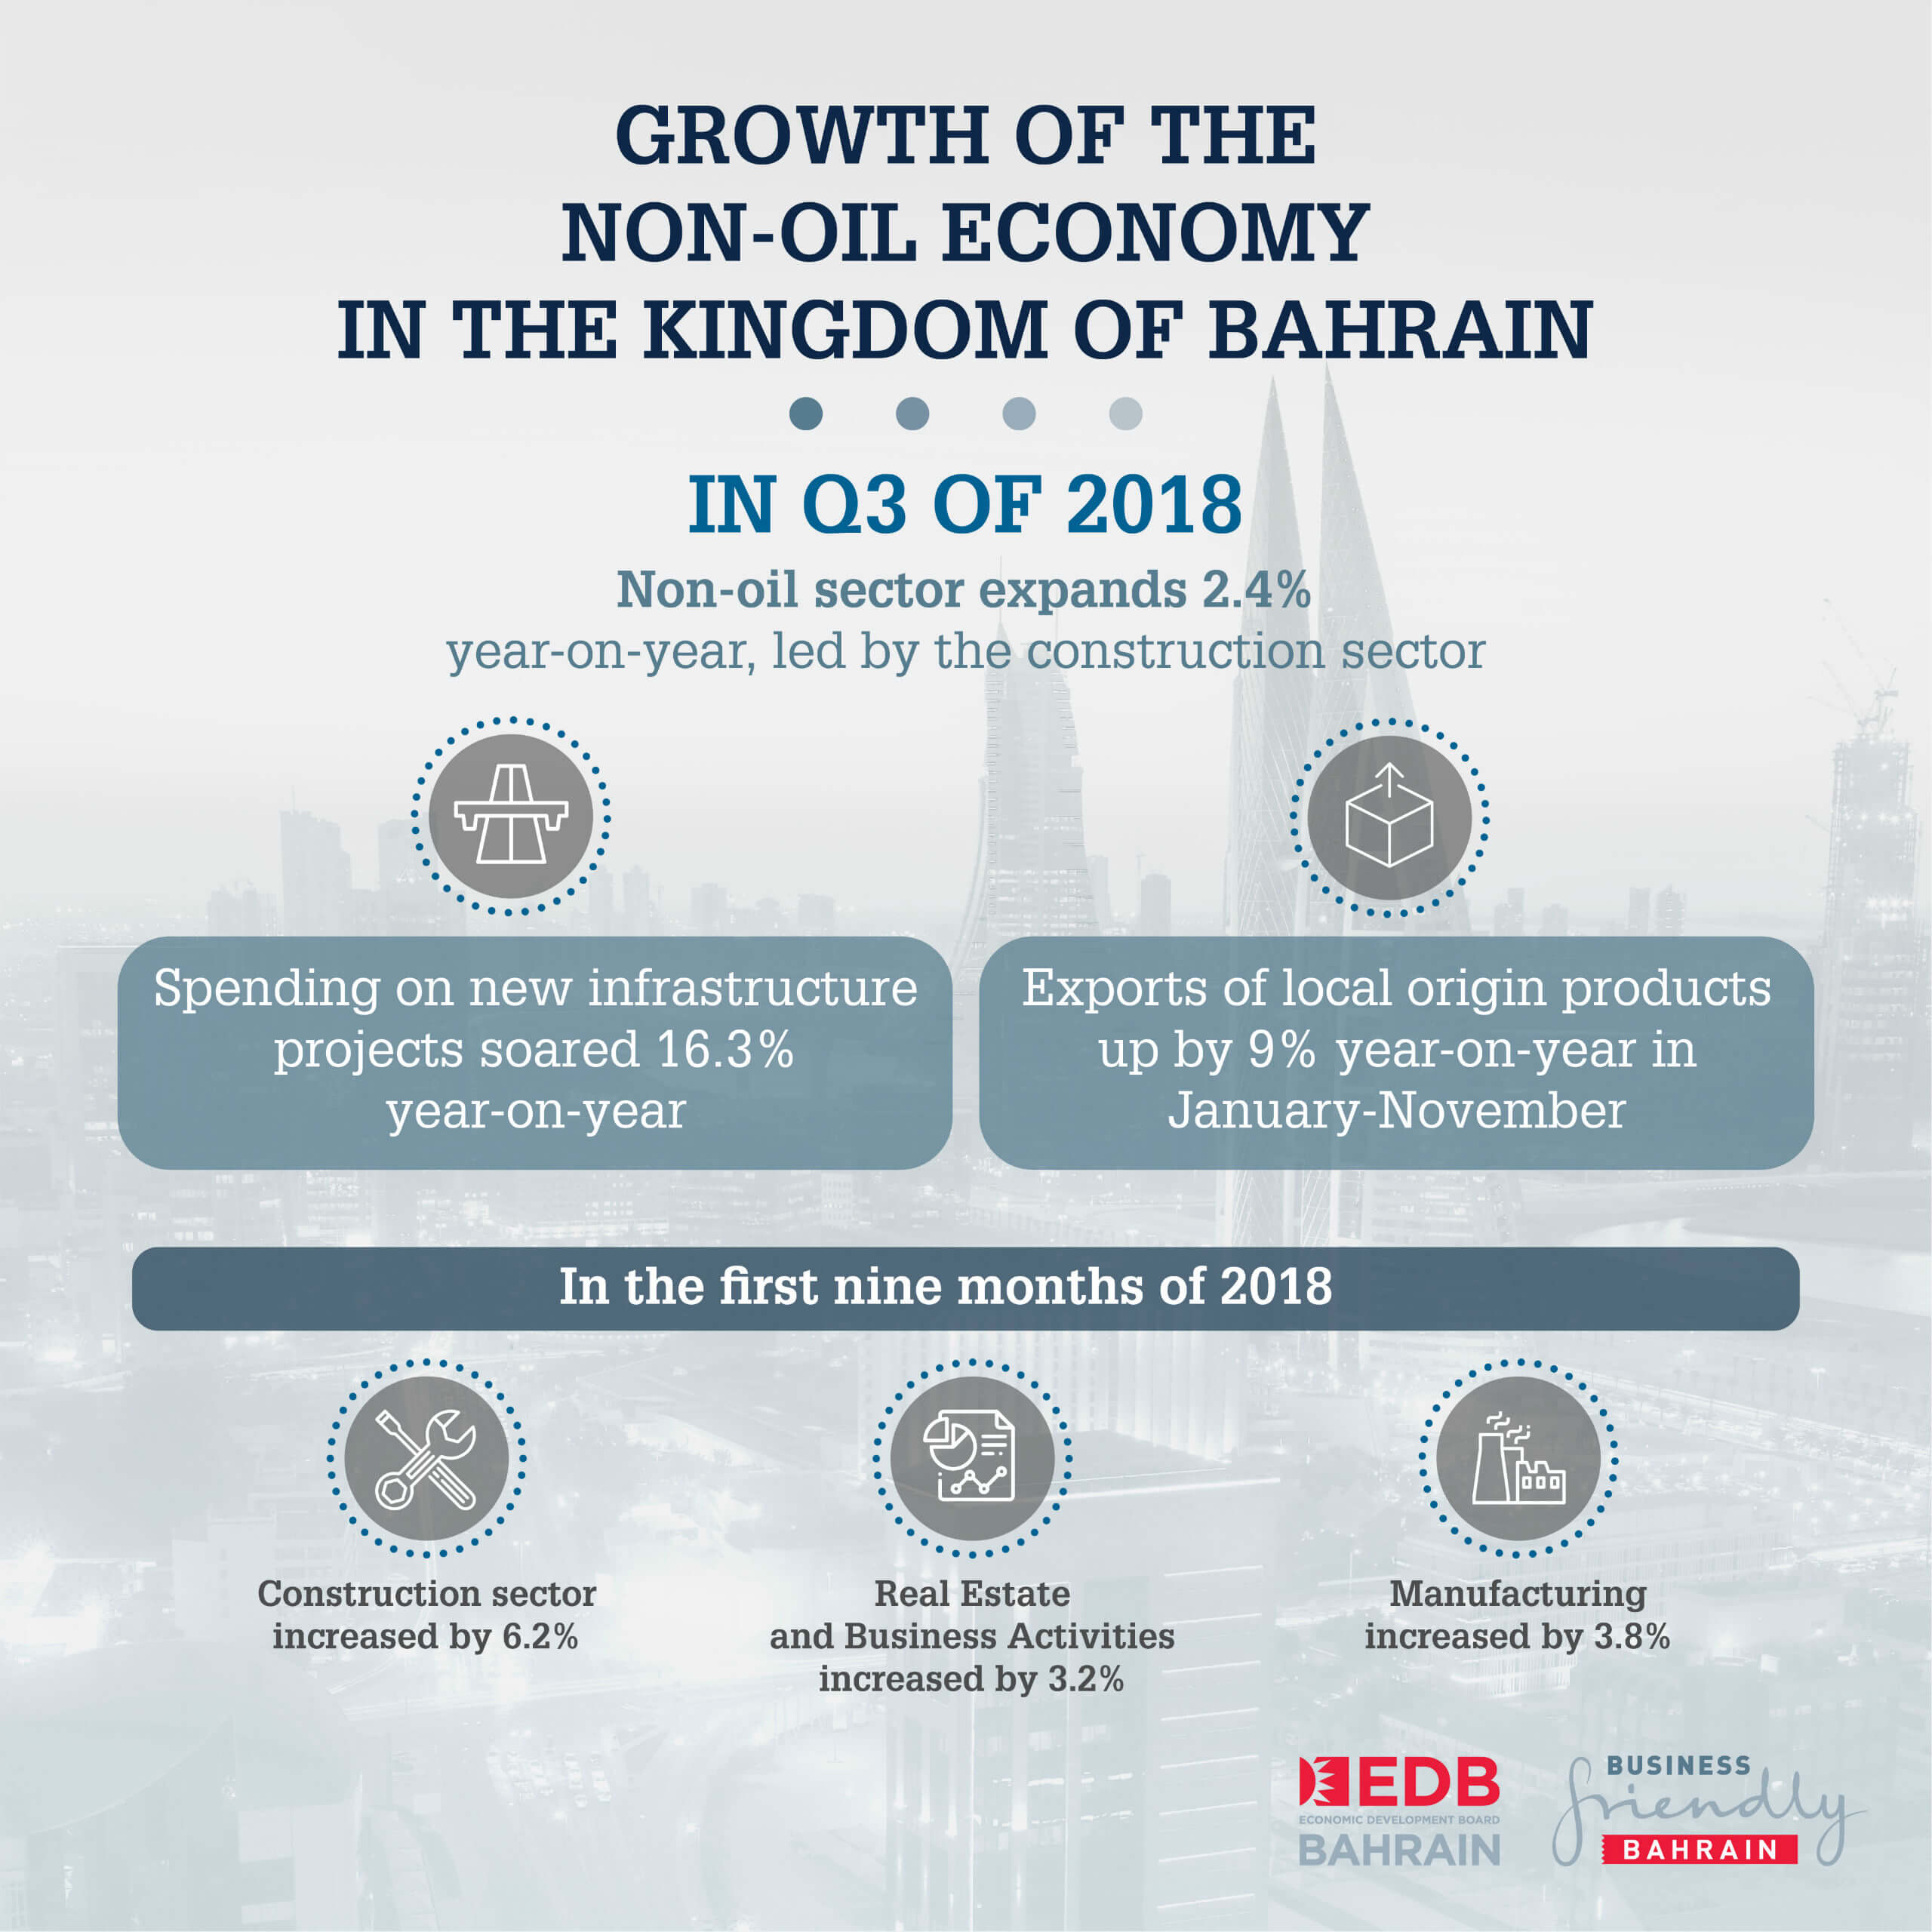 Infrastructure and construction underpin continuity in Bahrain’s non-oil growth